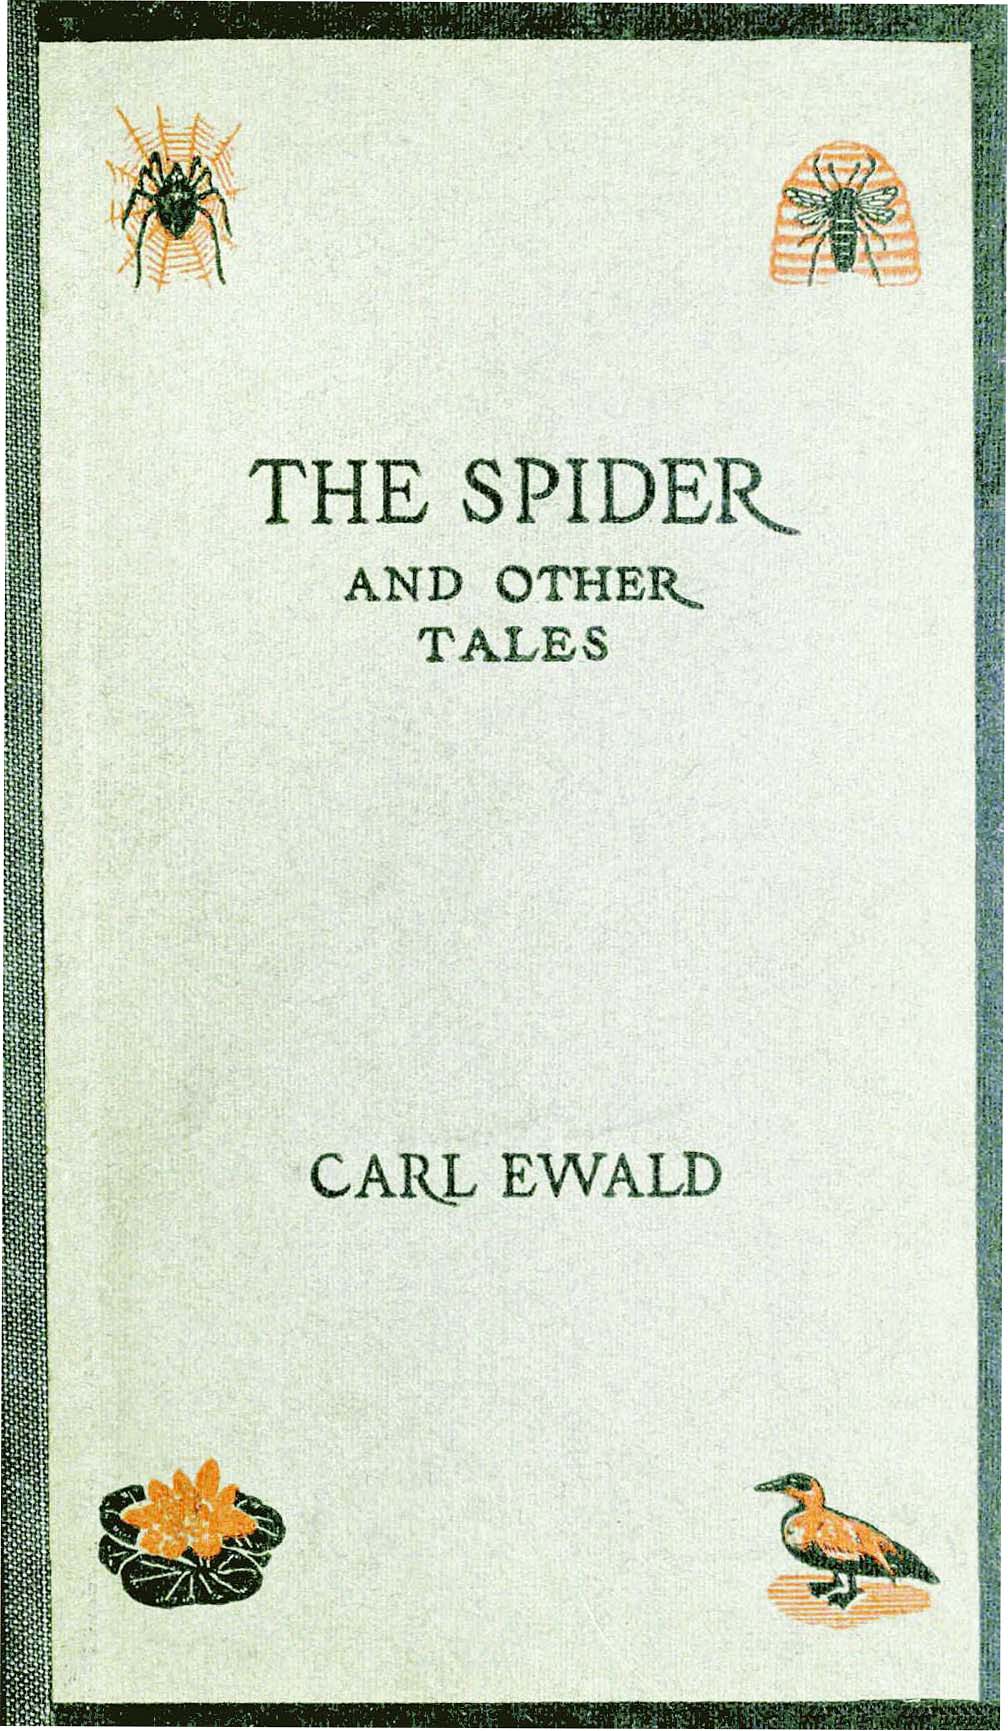 Erased: Unravelling the Spider's Thread